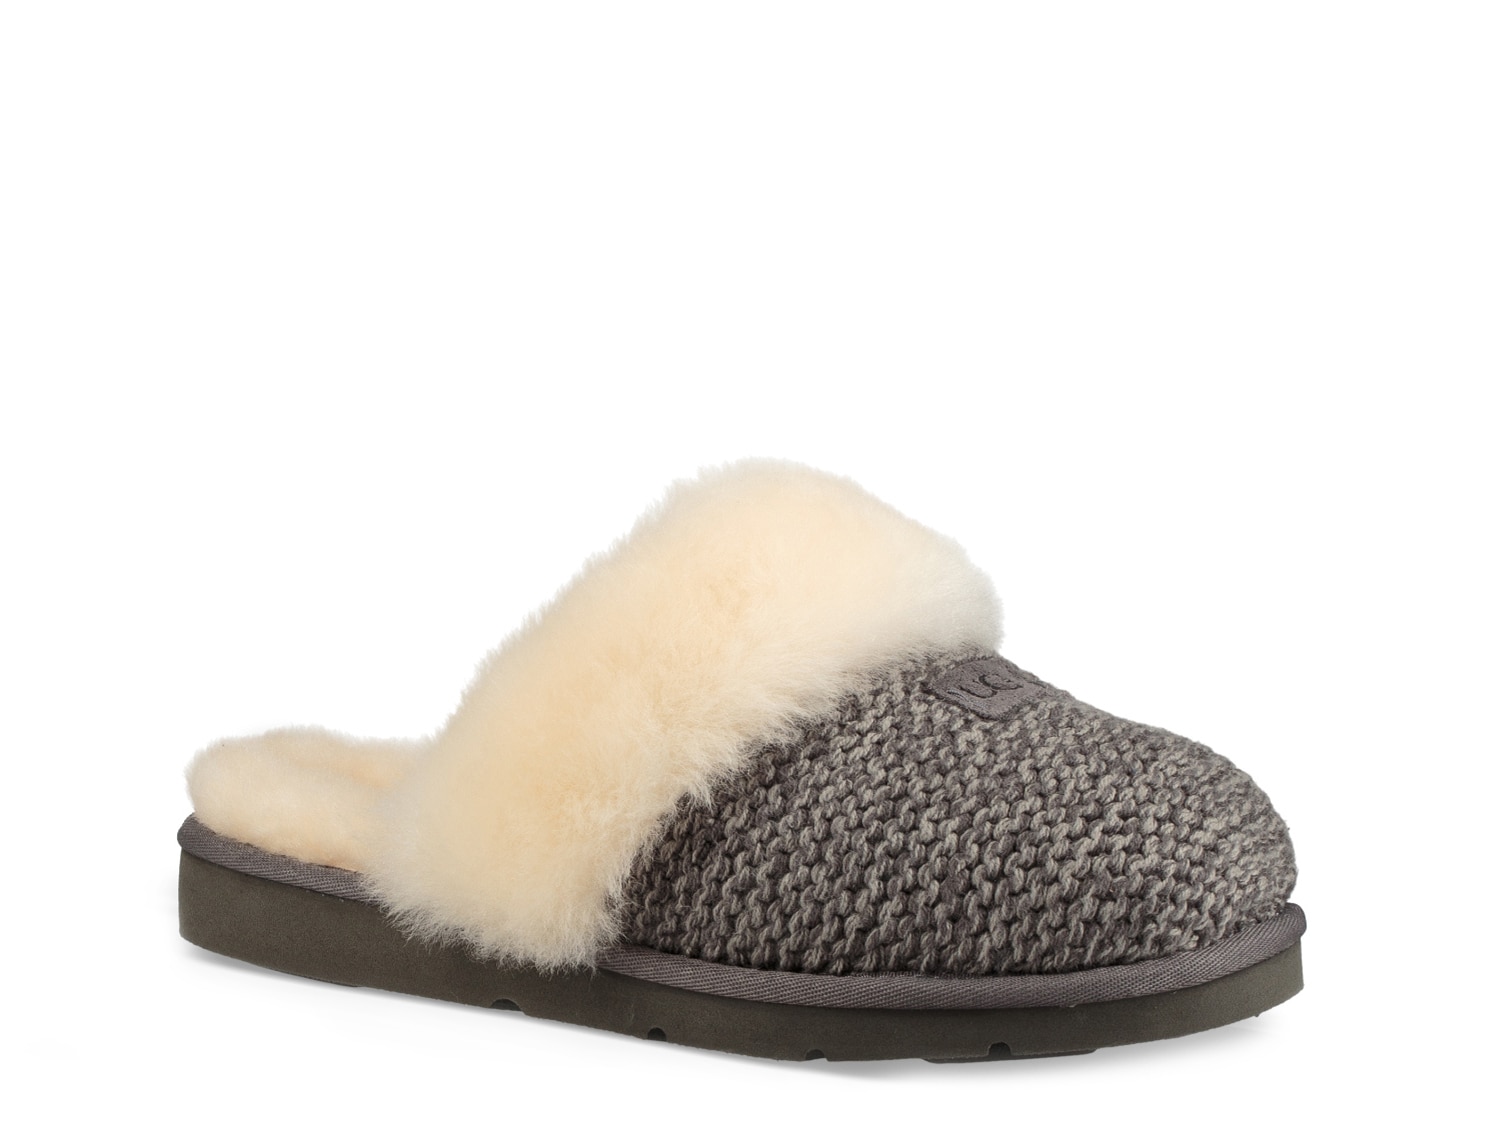 ugg slippers sale size 4